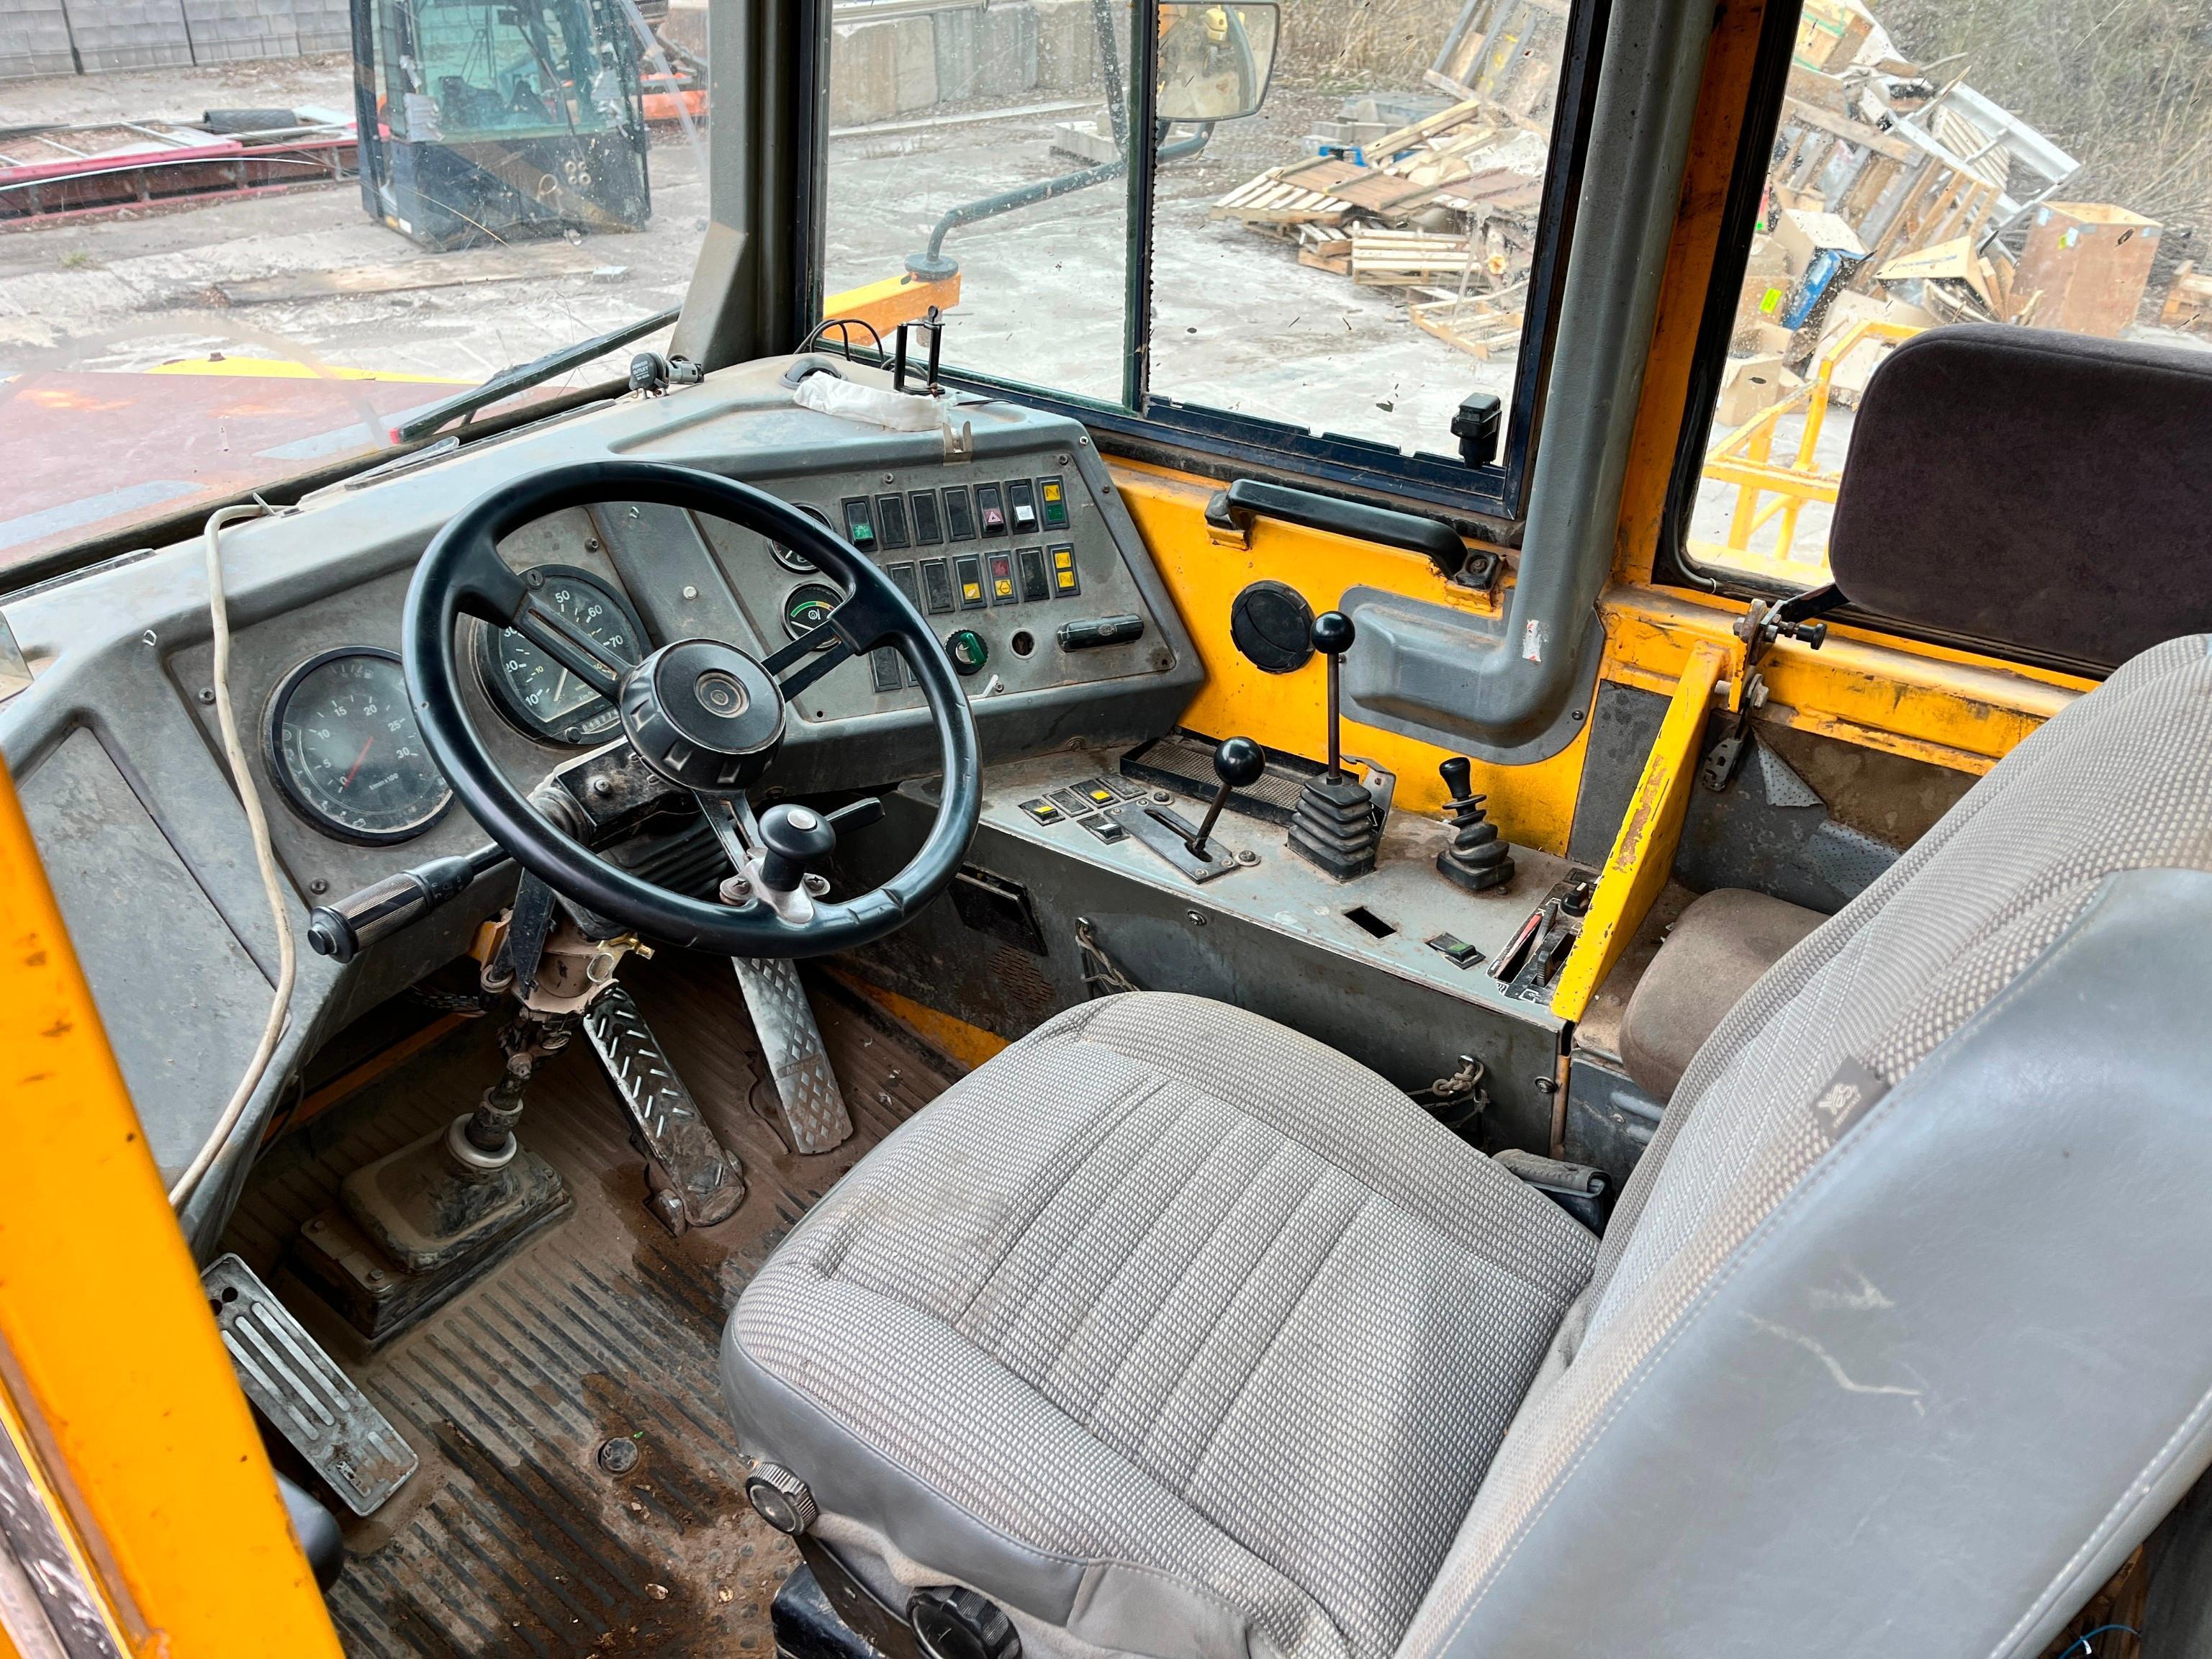 VOLVO A30C ARTICULATED HAUL TRUCK SN:A30CV60109 6x6, powered by Volvo diesel engine, equipped with